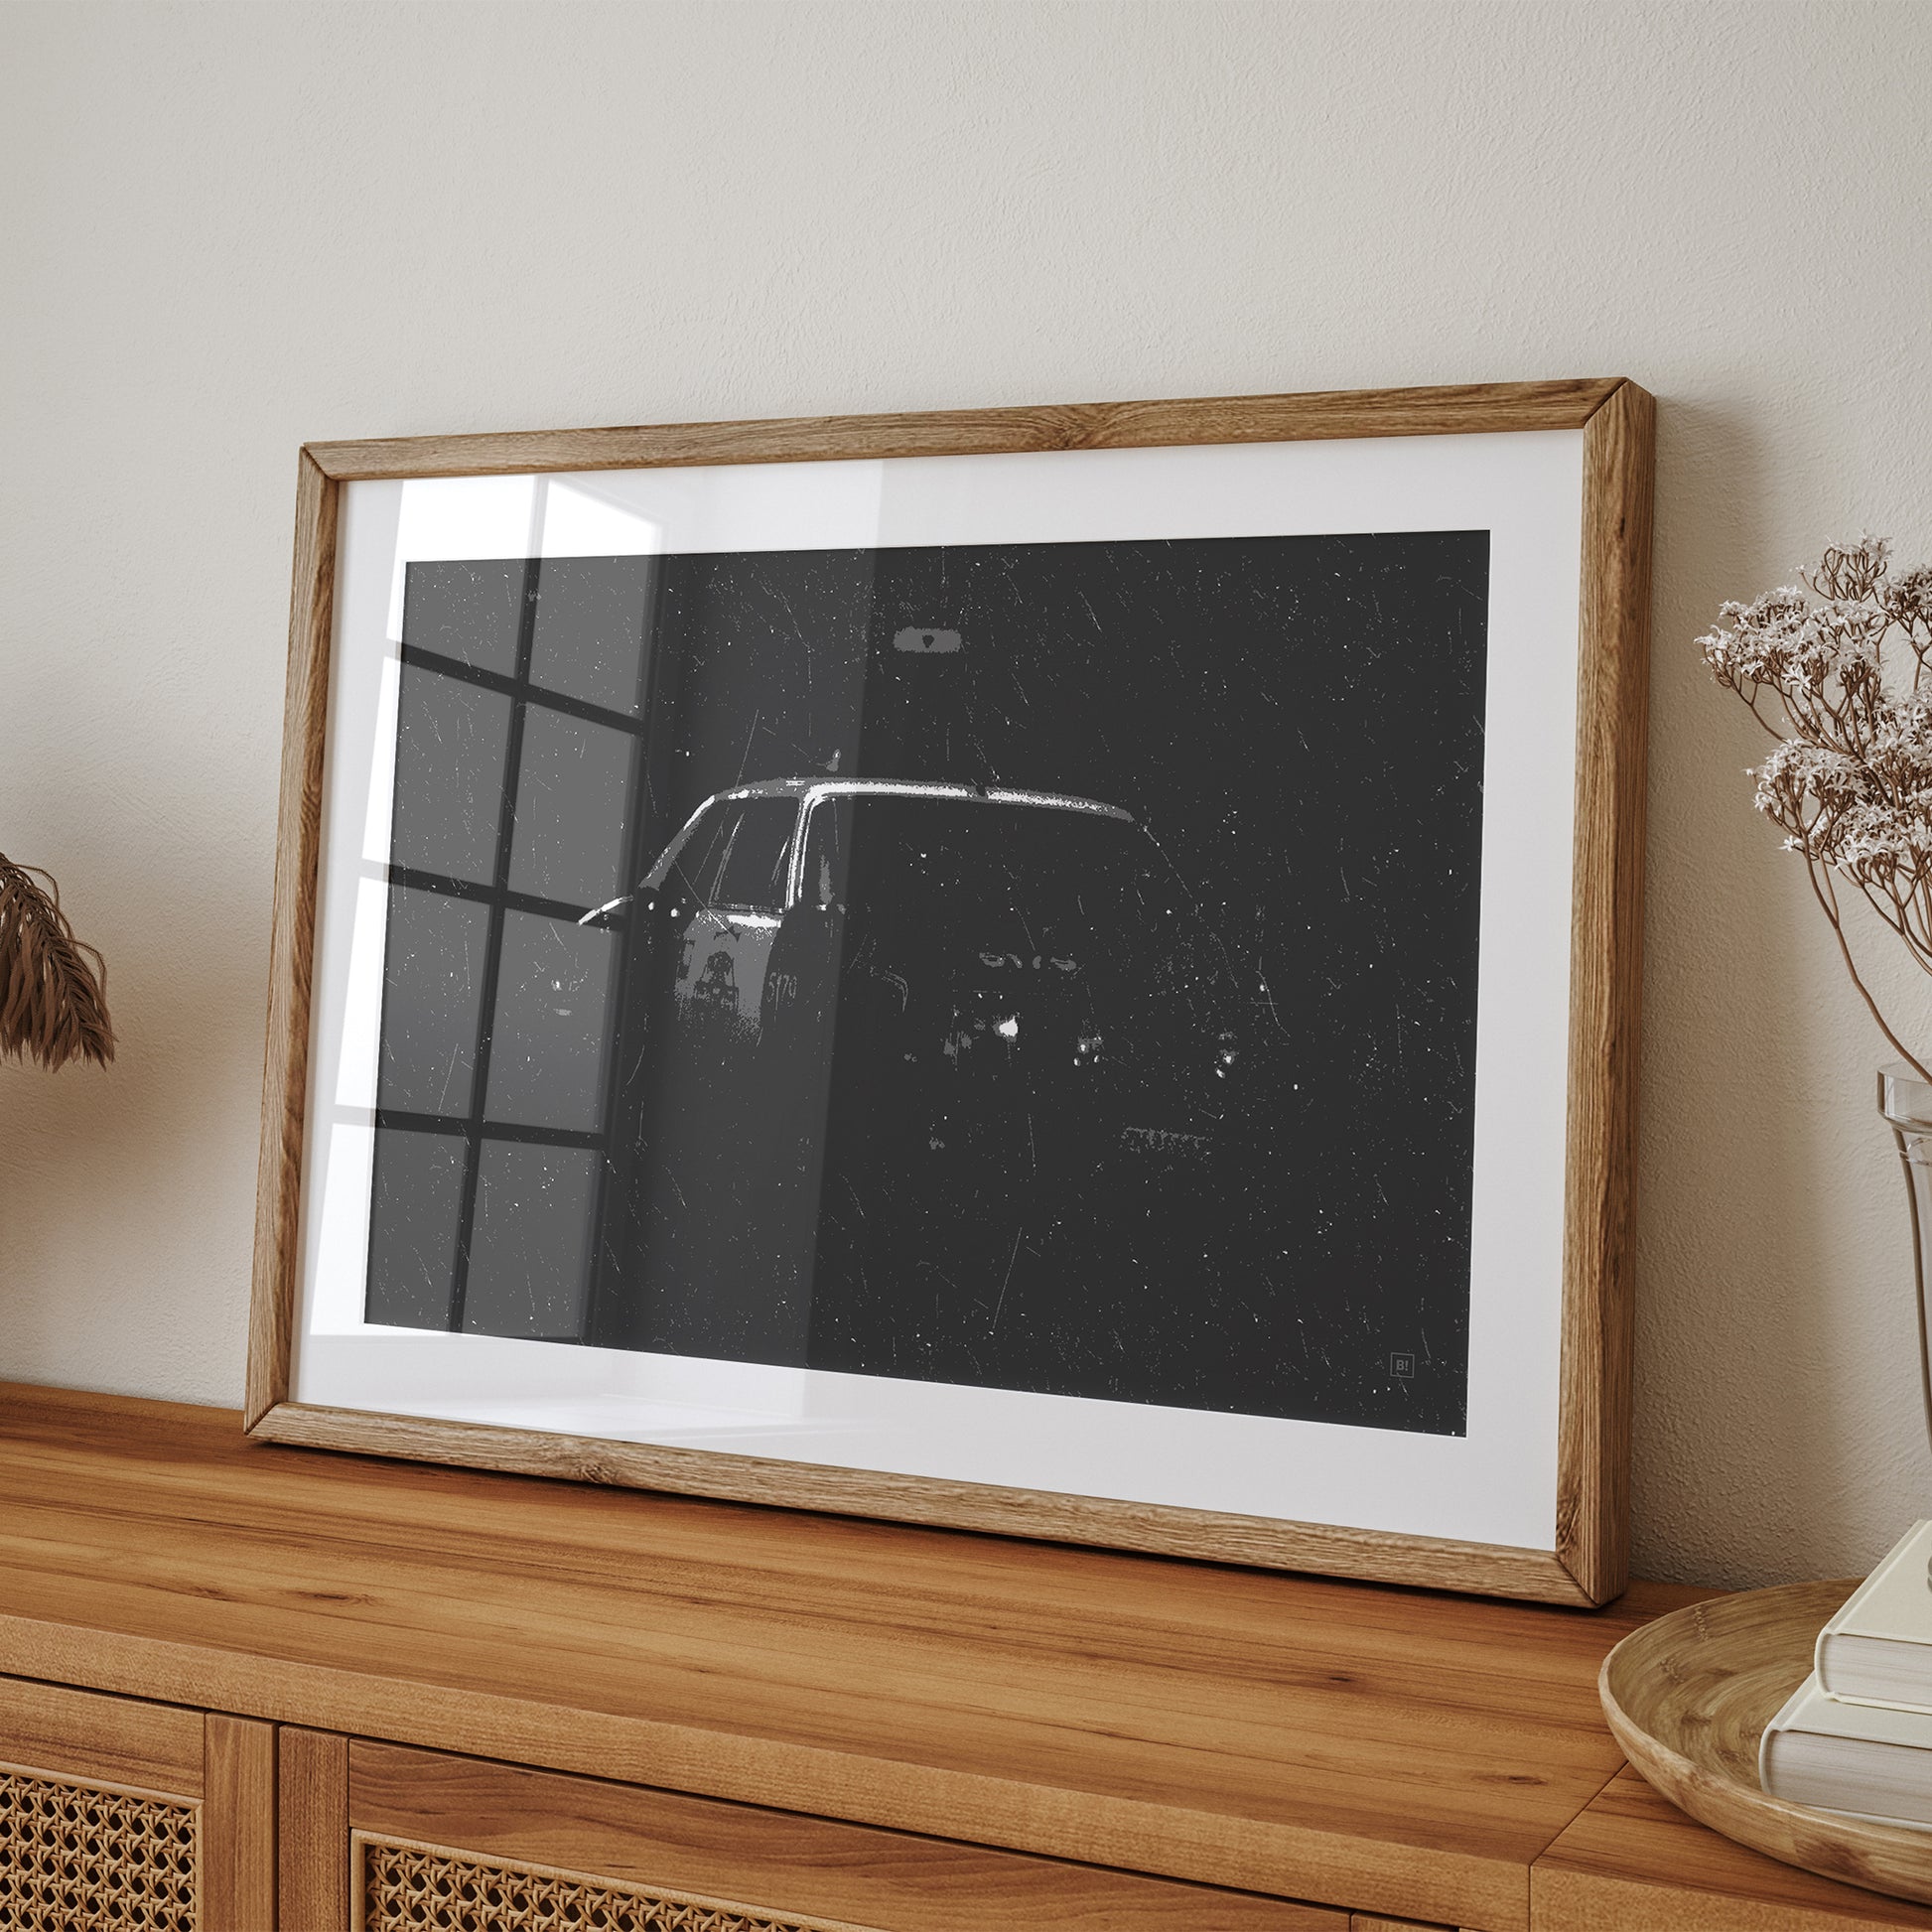 Be inspired by the black and white 5179 art print. This artwork is printed using giclée on archival acid-free paper and is presented in an natural oak frame with passe-partout that captures its timeless beauty in every detail.